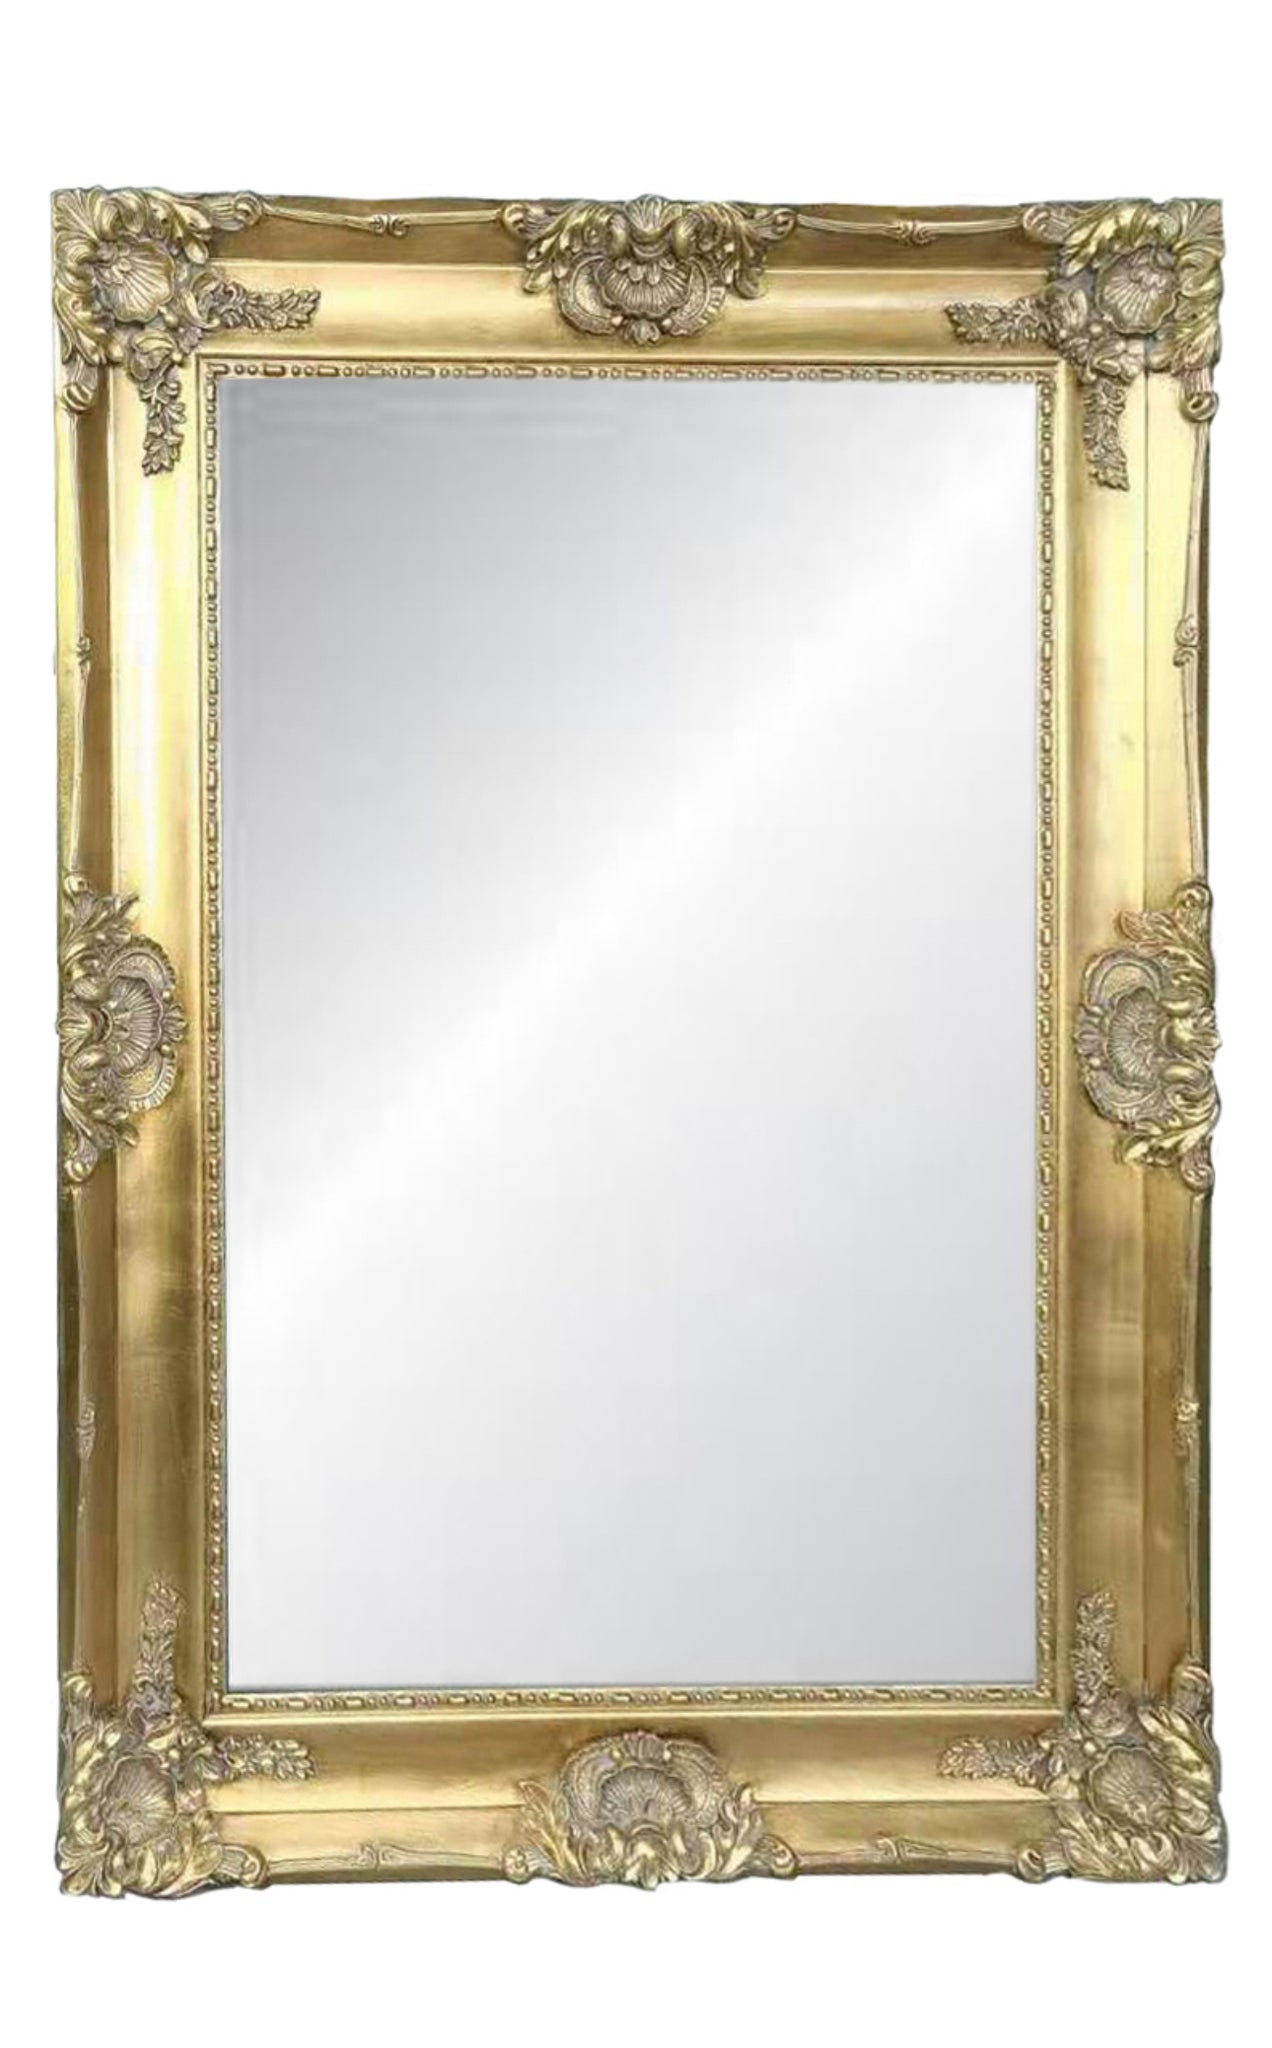 ORNATE BEVELLED MIRROR IN ANTIQUE GOLD